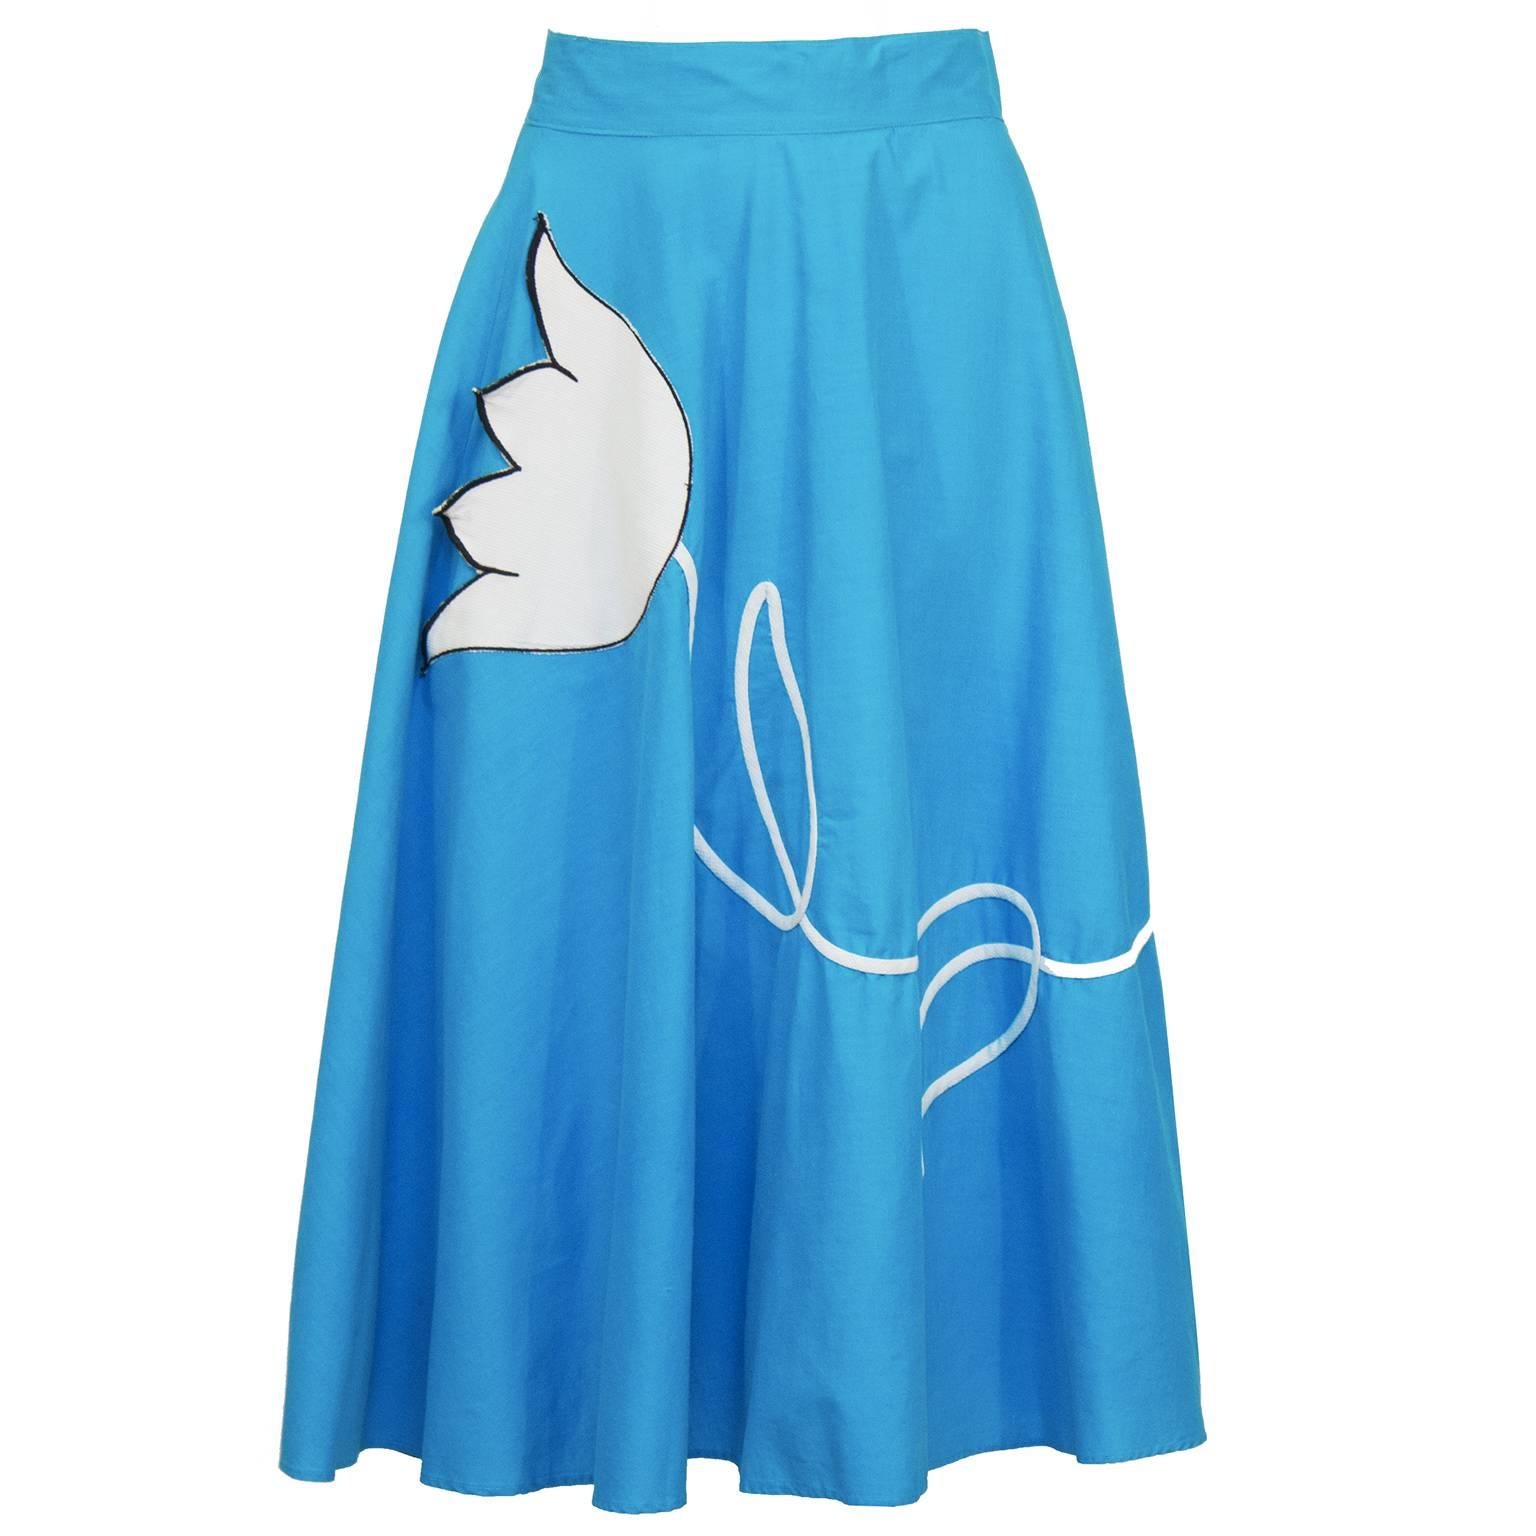 1950's Turquoise Circle Skirt with Tulip Applique